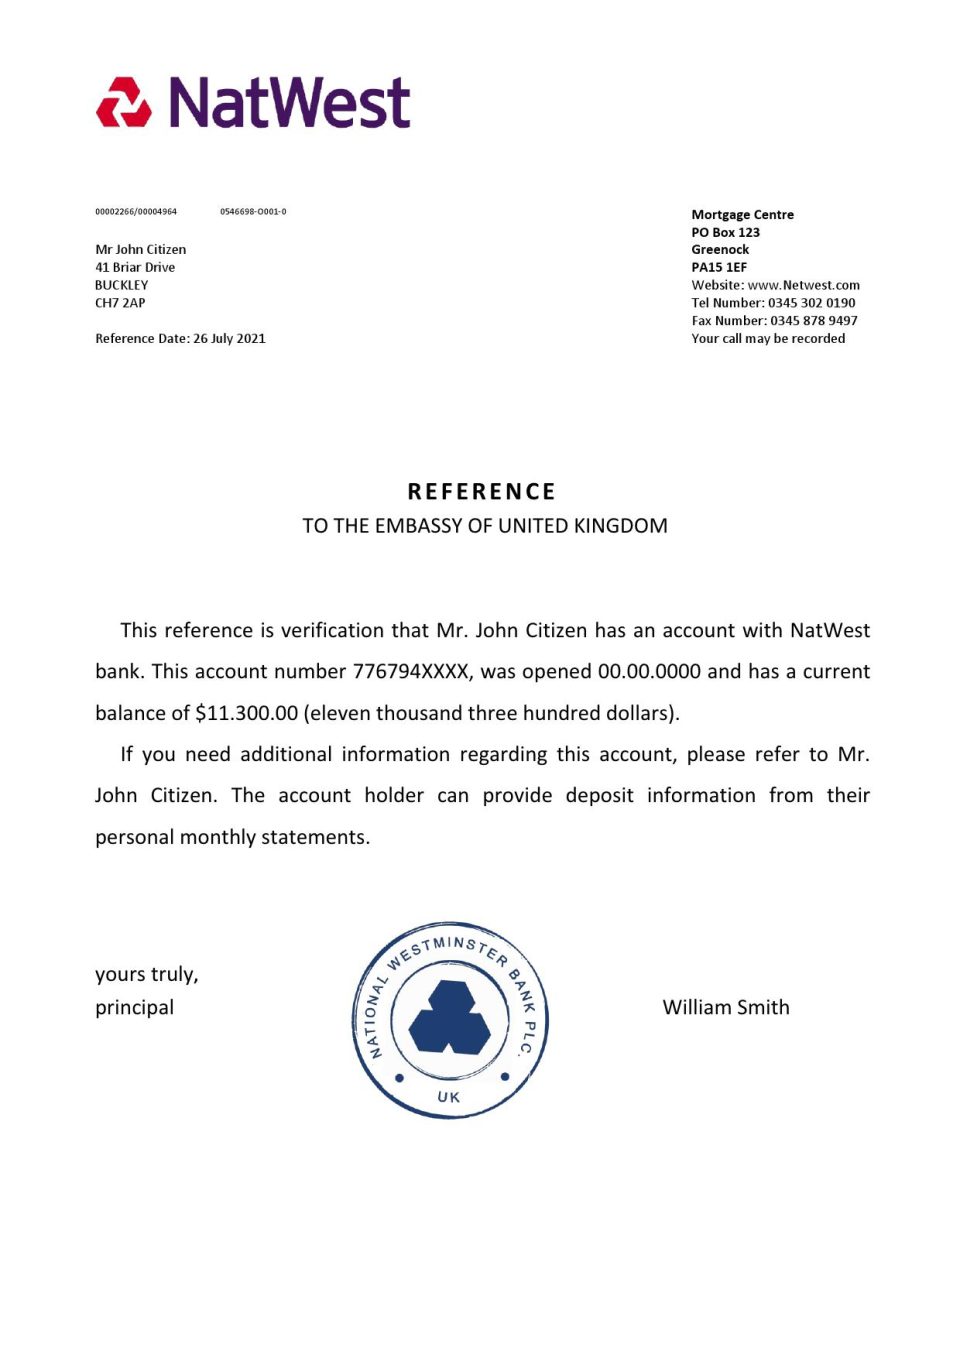 Download United Kingdom Natwest Bank Reference Letter Templates | Editable Word